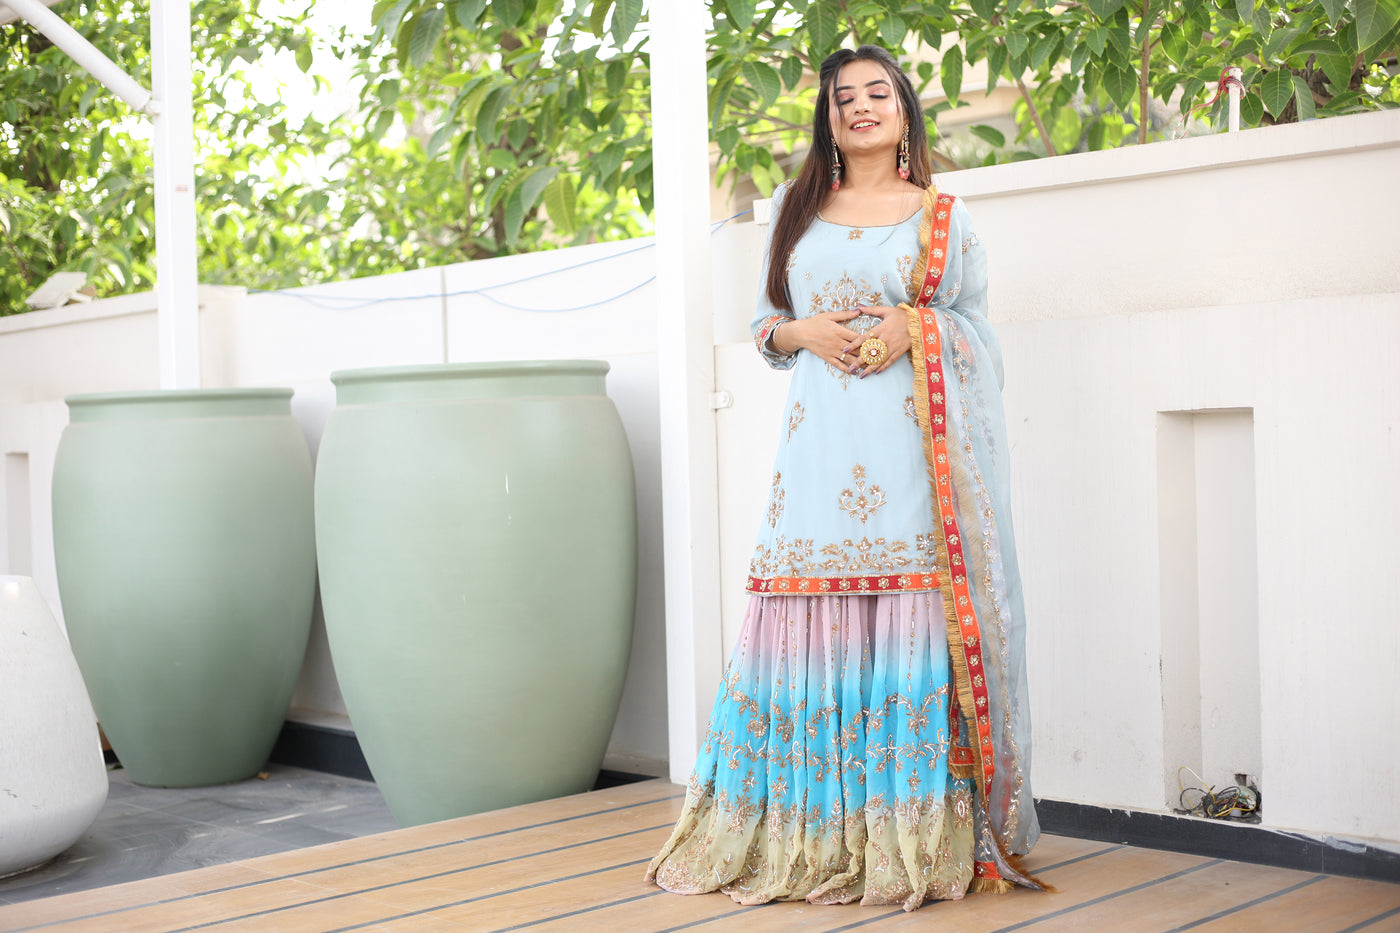 Misty Blue Dyed Sharara Set Indian Clothing in Denver, CO, Aurora, CO, Boulder, CO, Fort Collins, CO, Colorado Springs, CO, Parker, CO, Highlands Ranch, CO, Cherry Creek, CO, Centennial, CO, and Longmont, CO. NATIONWIDE SHIPPING USA- India Fashion X